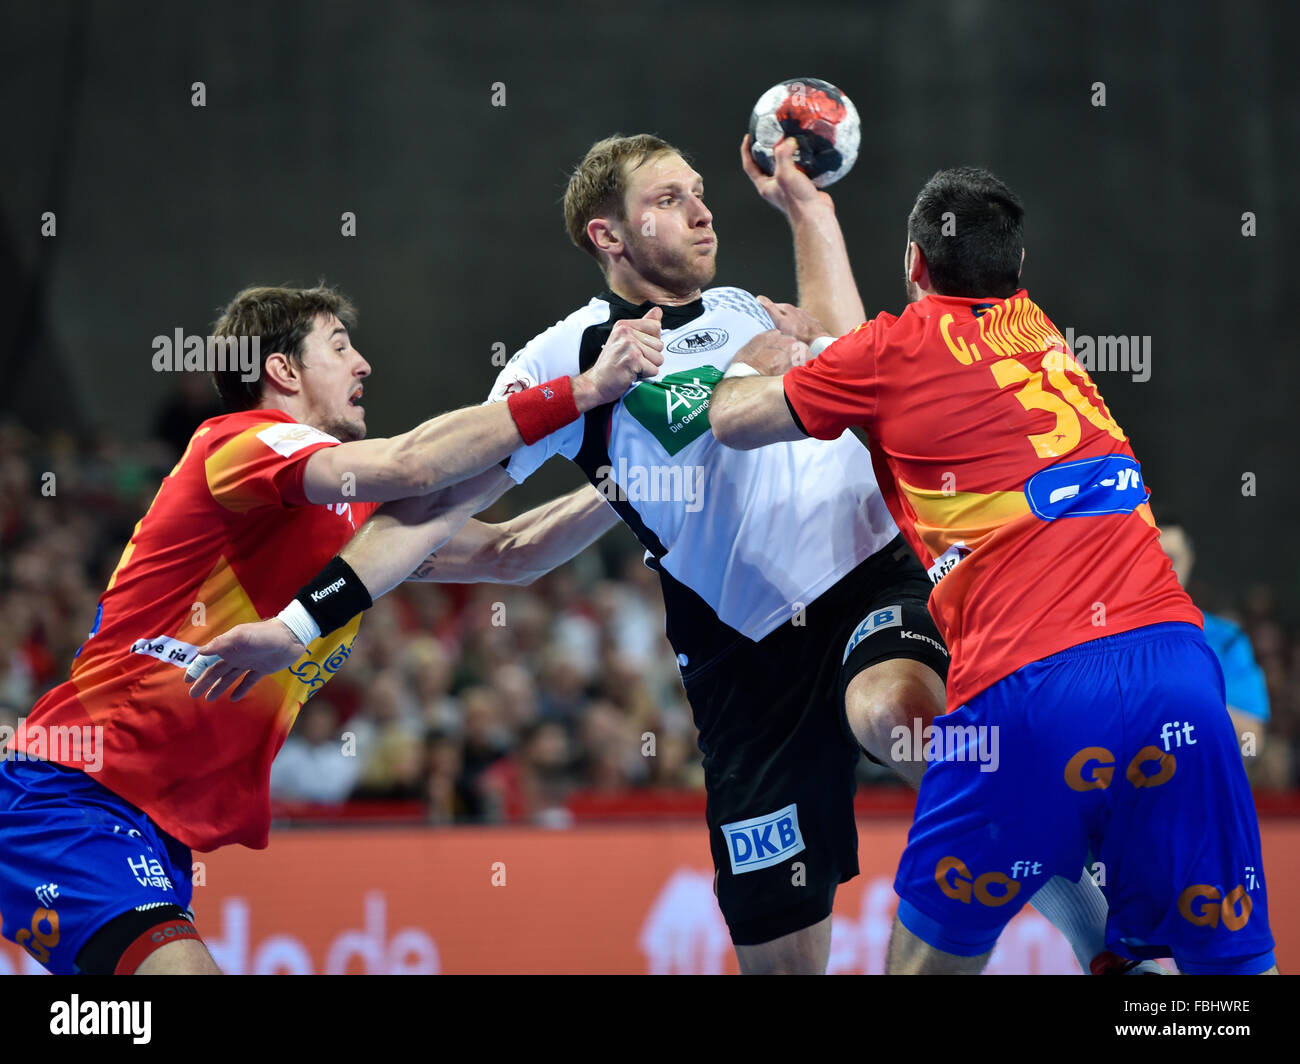 Wroclaw, Poland. 16th January, 2016. European Championships in Men's Handball, EHF EURO 2016 Group C match Spain - Germany 32:29. In action Steffen Weinhold Credit:  Piotr Dziurman/Alamy Live News Stock Photo